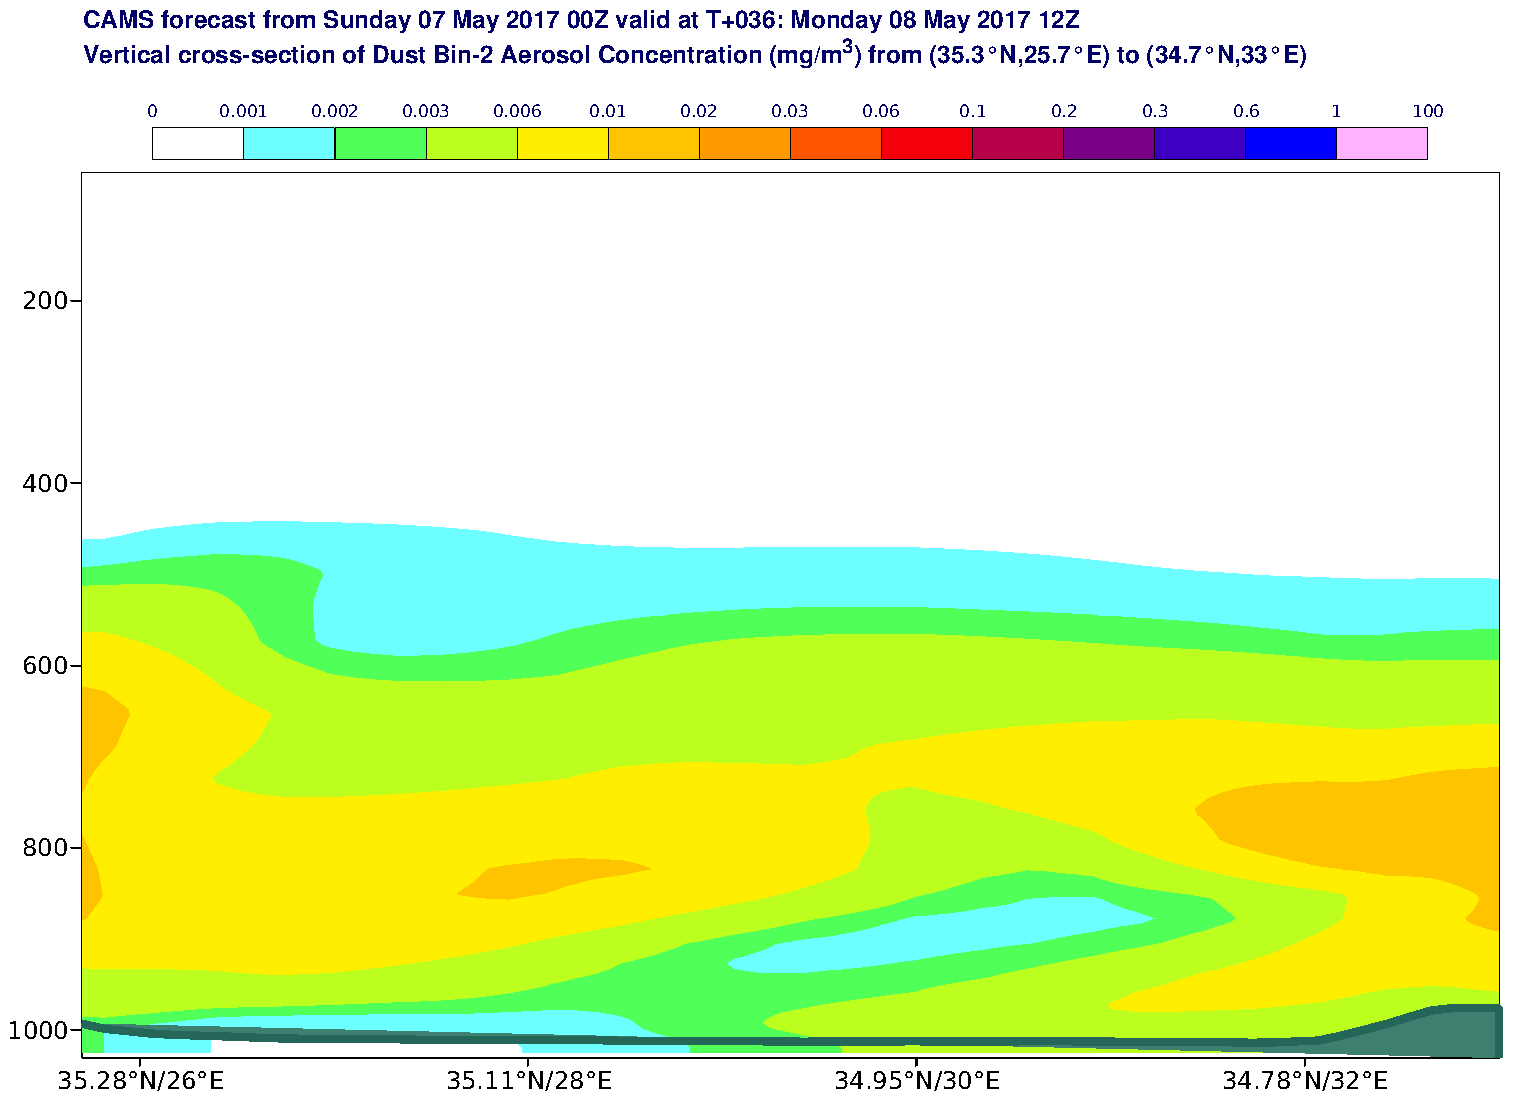 Vertical cross-section of Dust Bin-2 Aerosol Concentration (mg/m3) valid at T36 - 2017-05-08 12:00